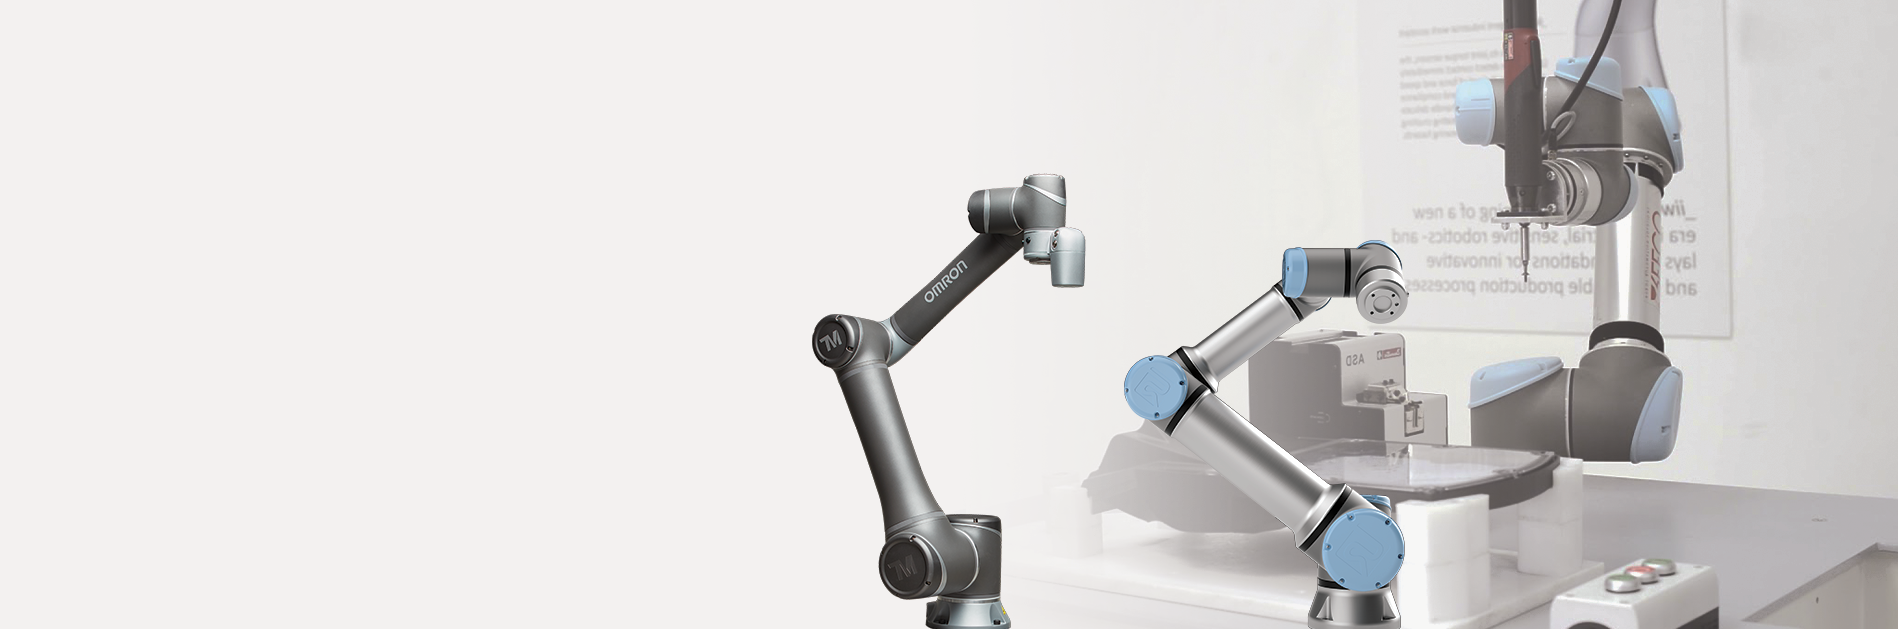 Cobot products